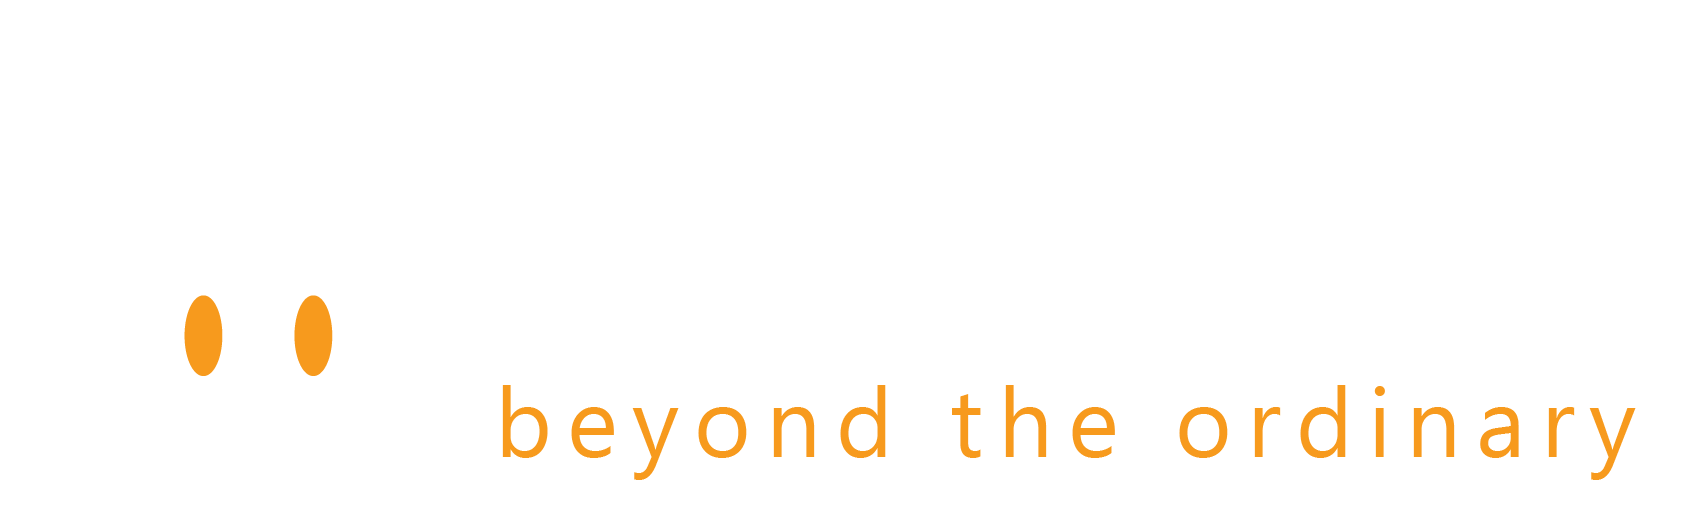 Bids and Beyond | Our People - Bids and Beyond